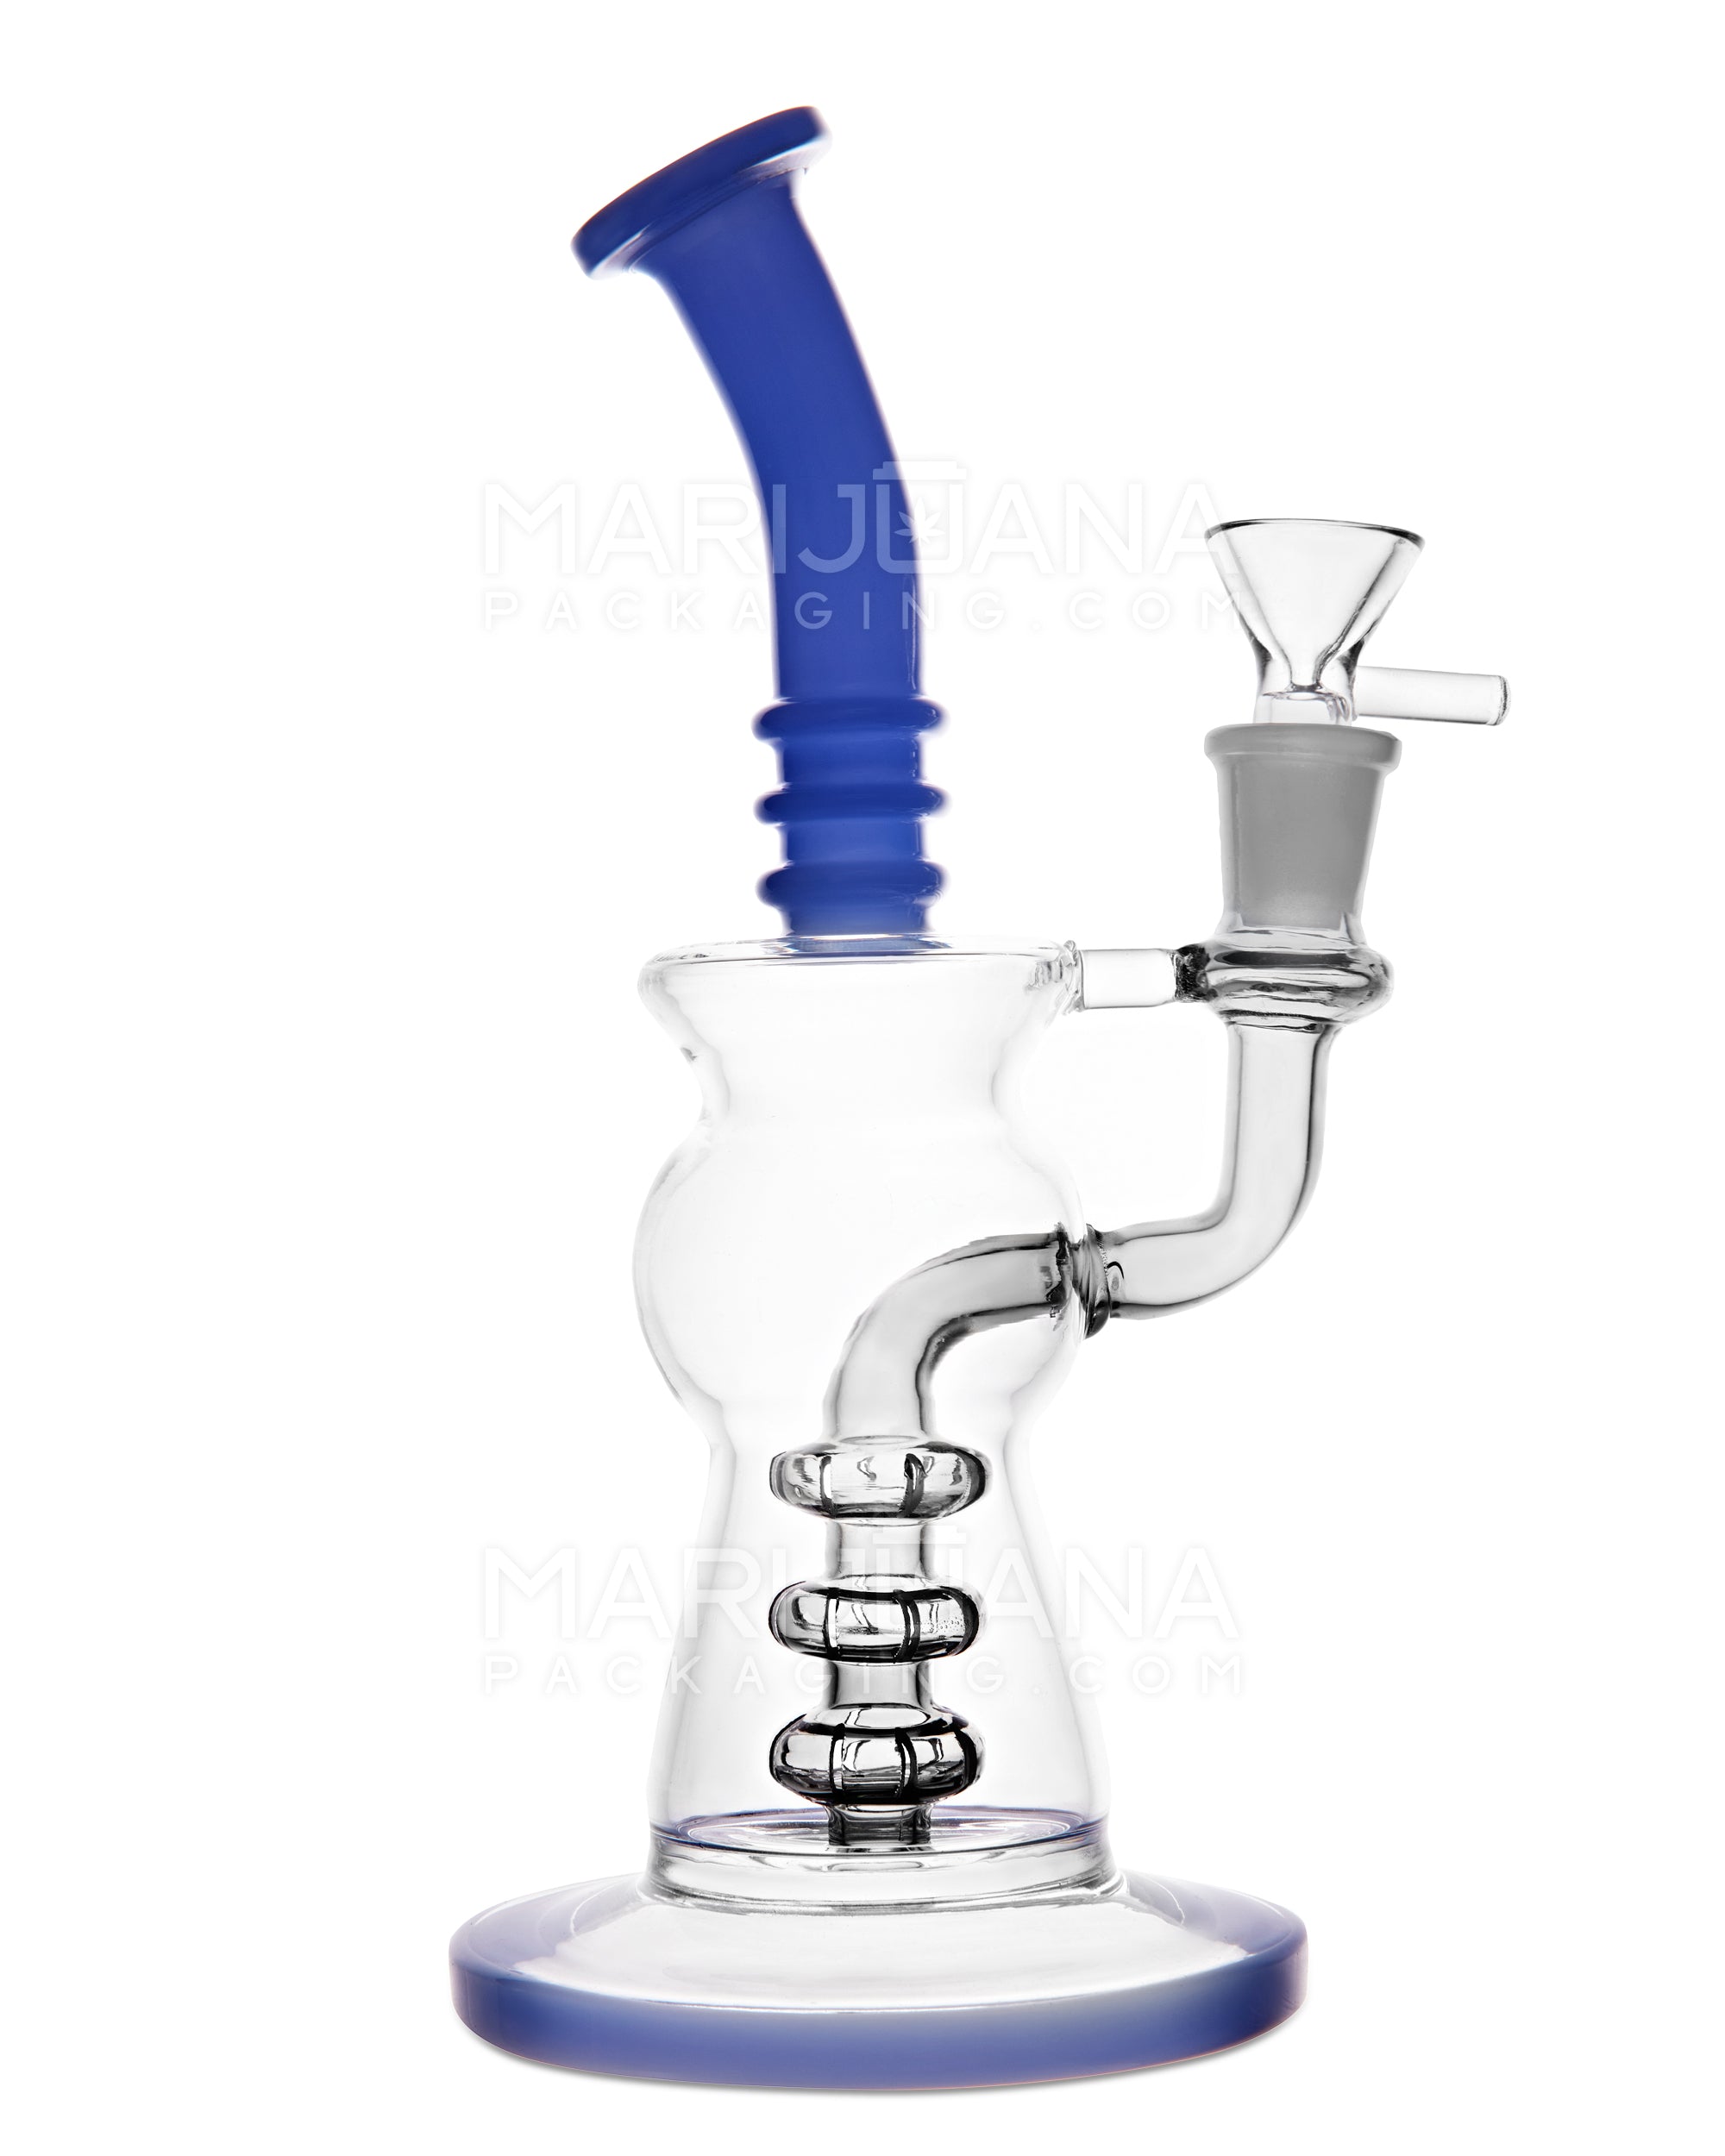 Bent Neck Ringed Triple Matrix Perc Glass Water Pipe w/ Thick Base | 8.5in Tall - 14mm Bowl - Blue - 1